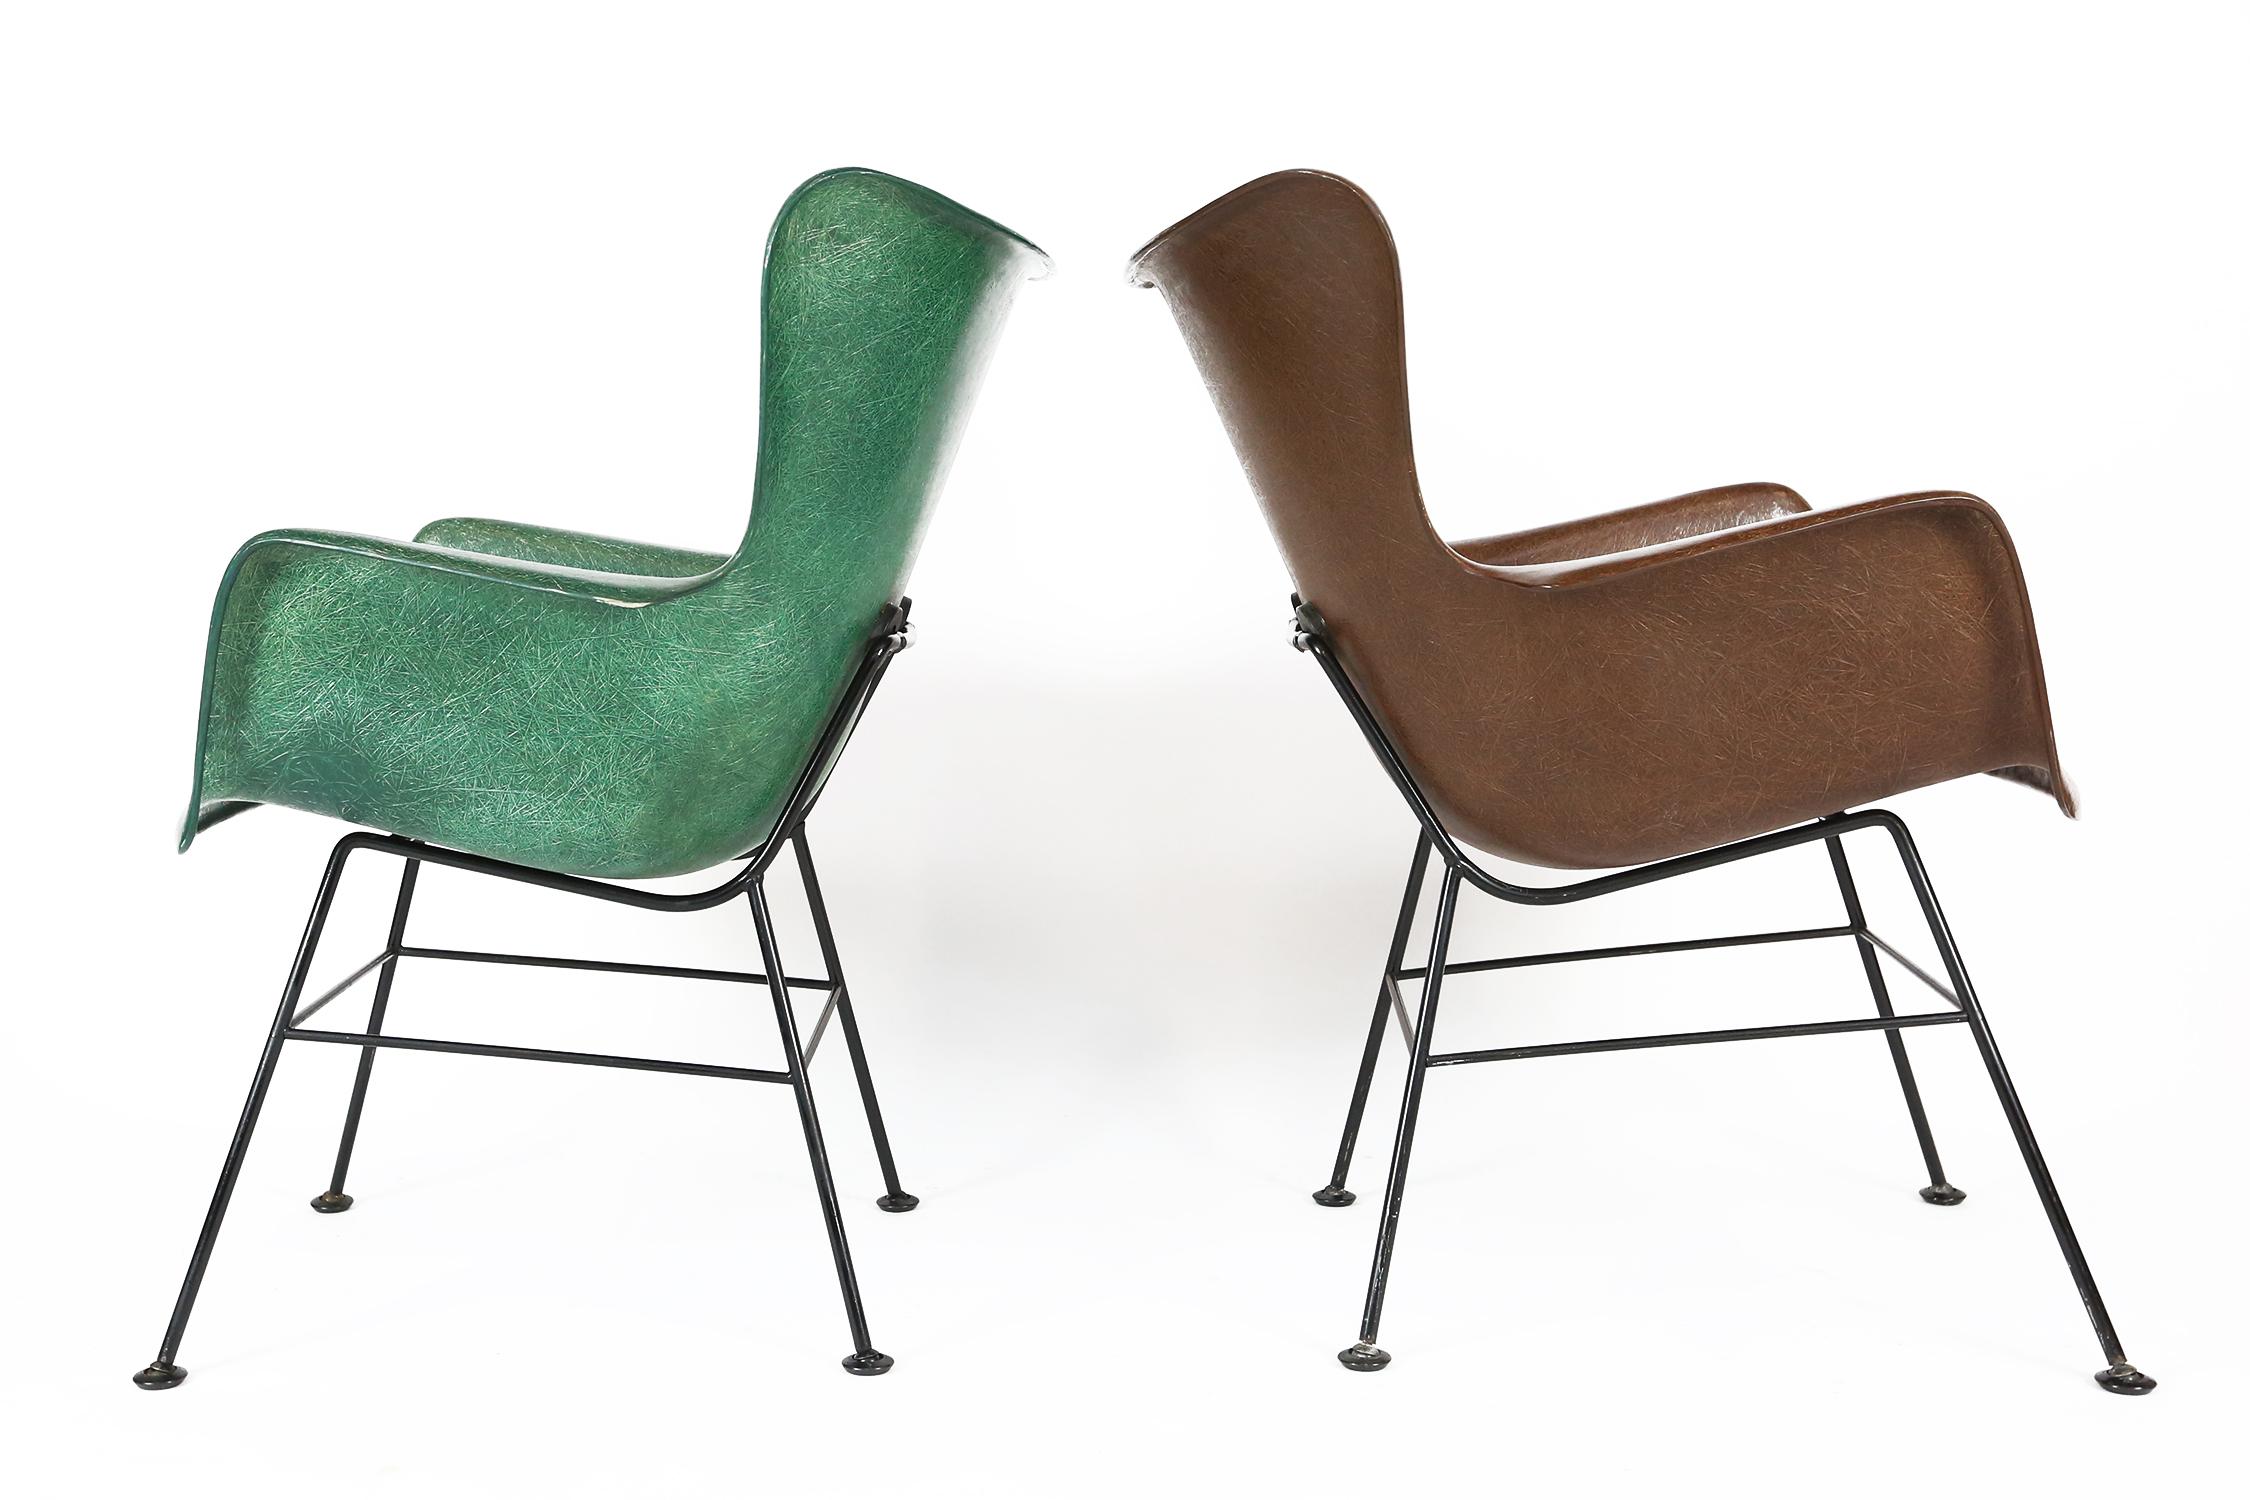 2 super comfortable fiberglass shell chairs designed by Lawrence Peabody in green & brown fiberglass with black cast iron back support and cast iron legs. 
A nice counter point to the ubiquitous Eames shell chair. 

Shock mounts are in excellent